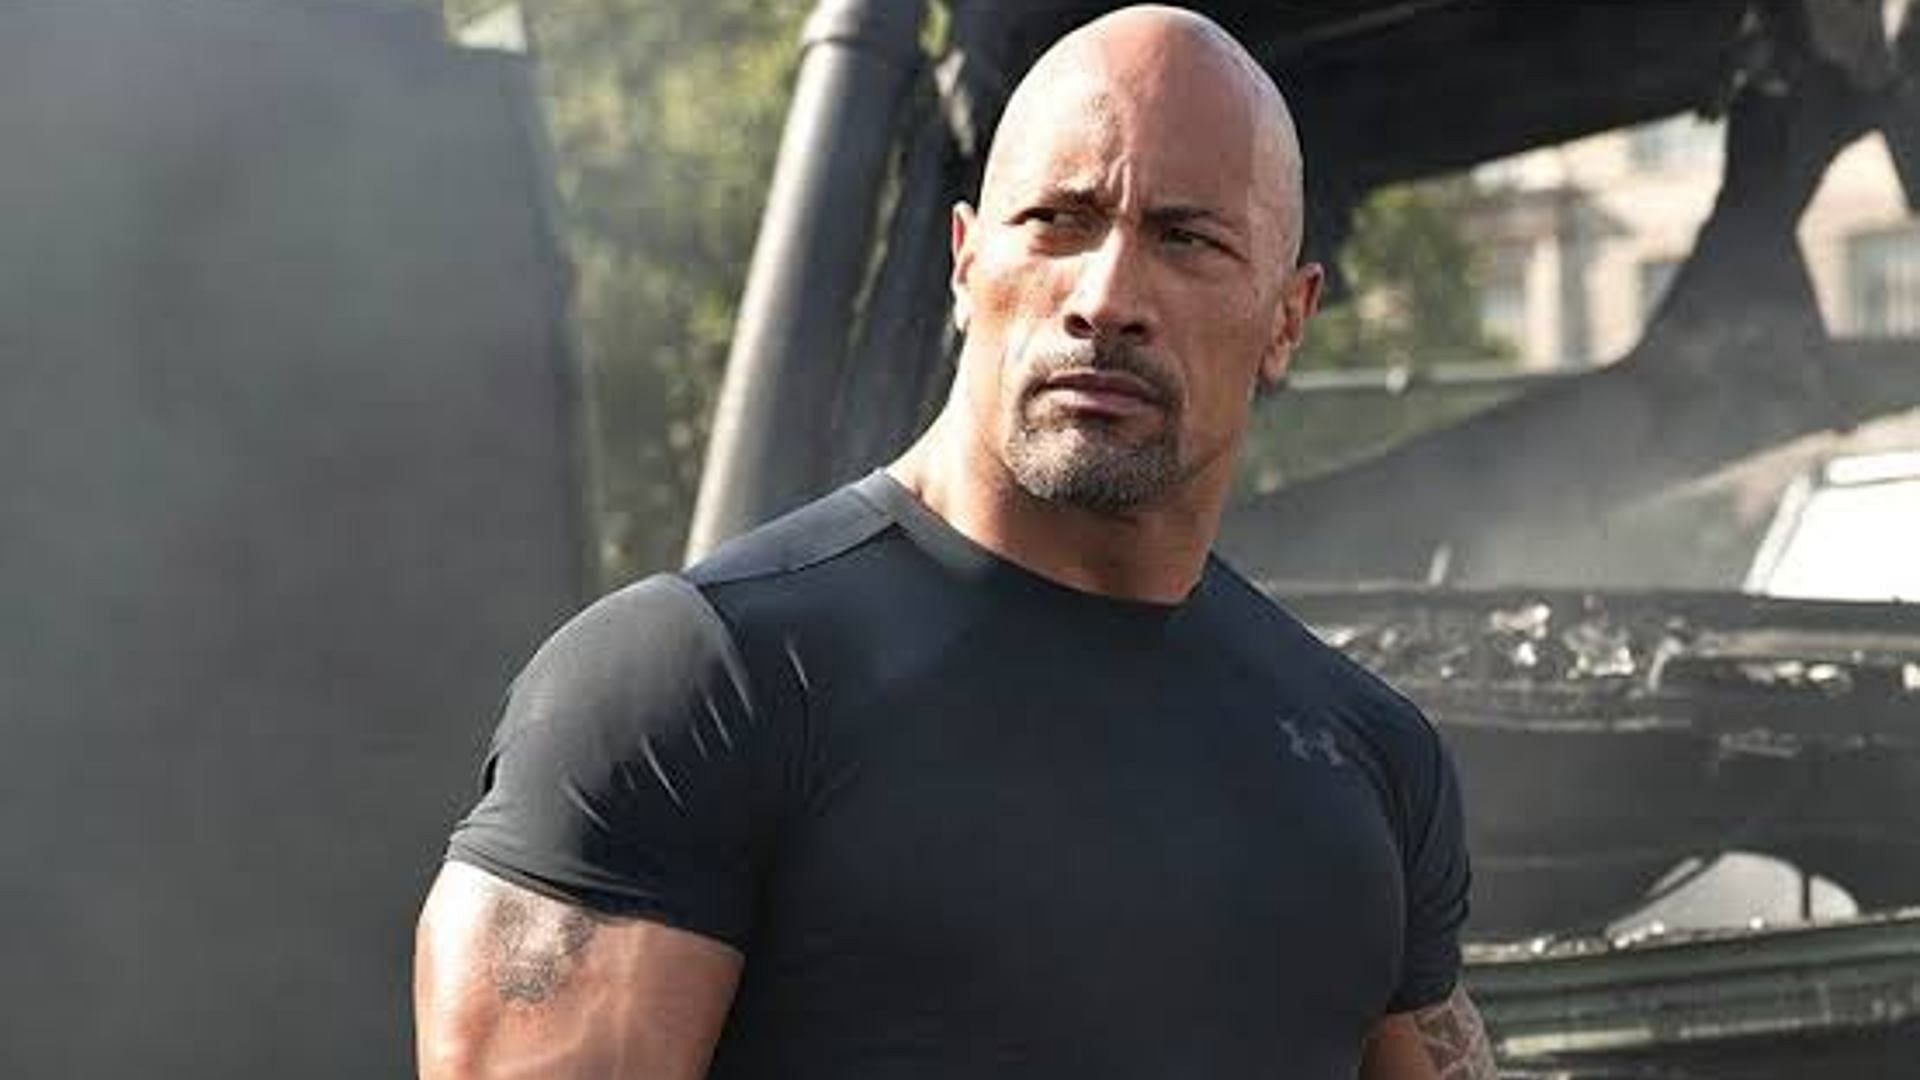 IF YA SMELL WHAT THE ROCK IS COOKING!